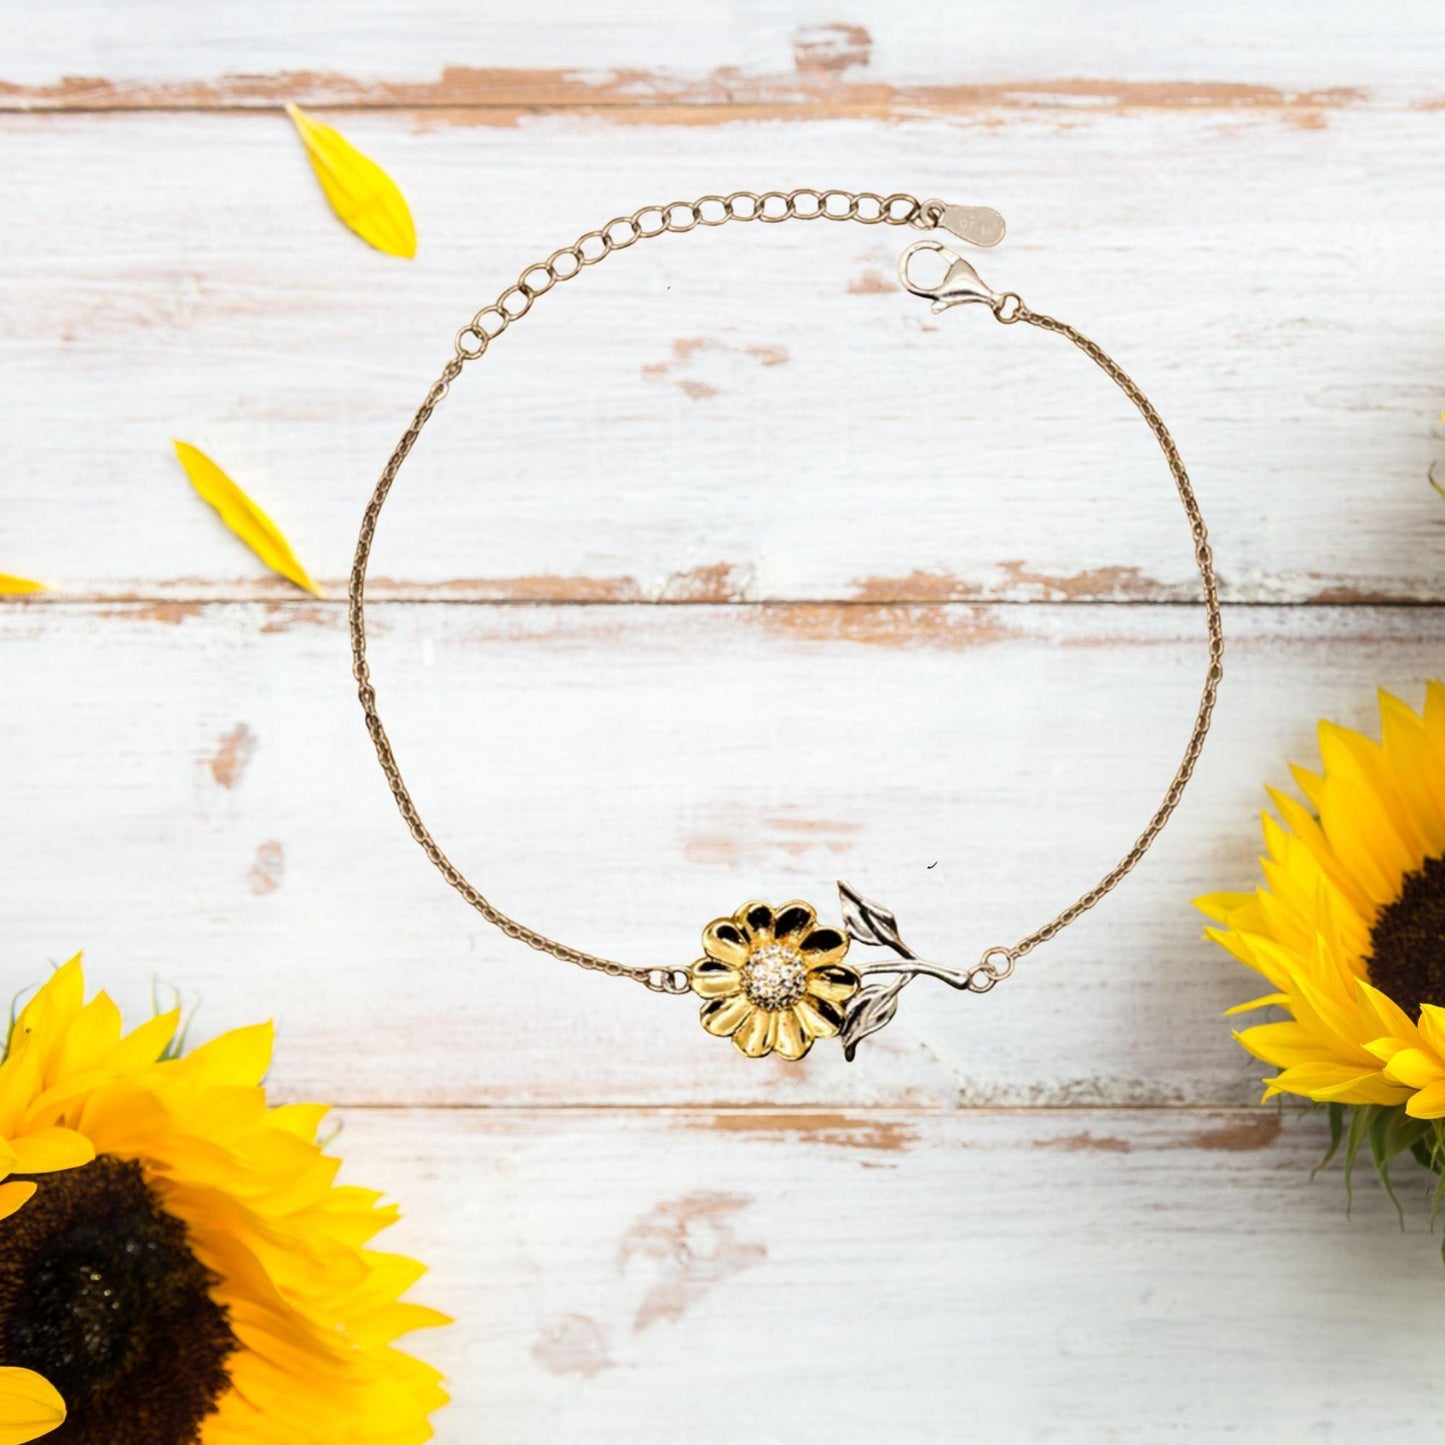 Loan Officer Sunflower Bracelet - Thanks for being who you are - Birthday Christmas Jewelry Gifts Coworkers Colleague Boss - Mallard Moon Gift Shop